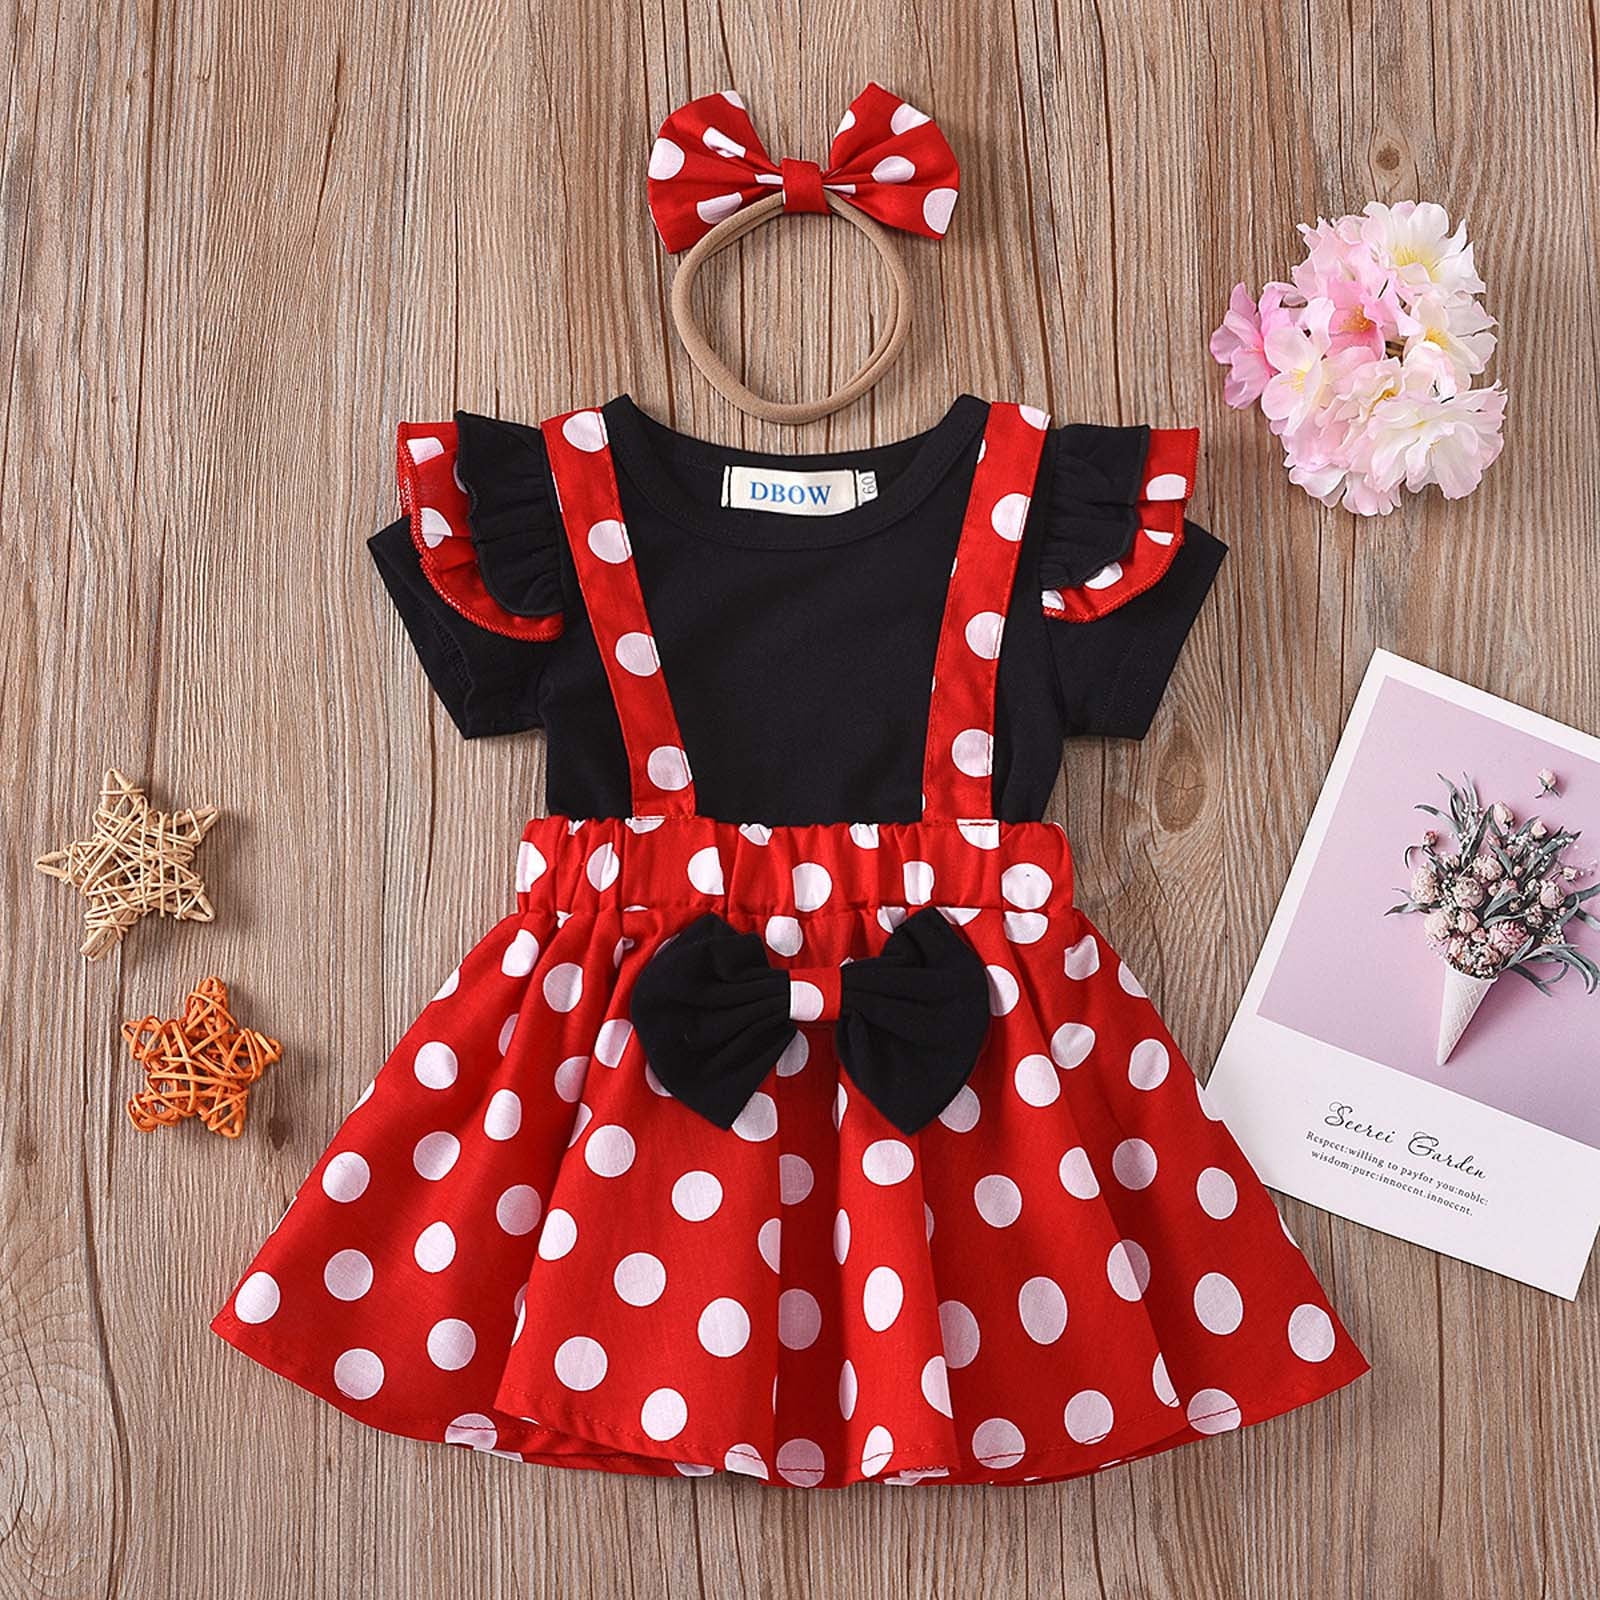 AURIGATE Clearance! Baby Clothing Infant Toddler Girls Dots Bow-knot ...